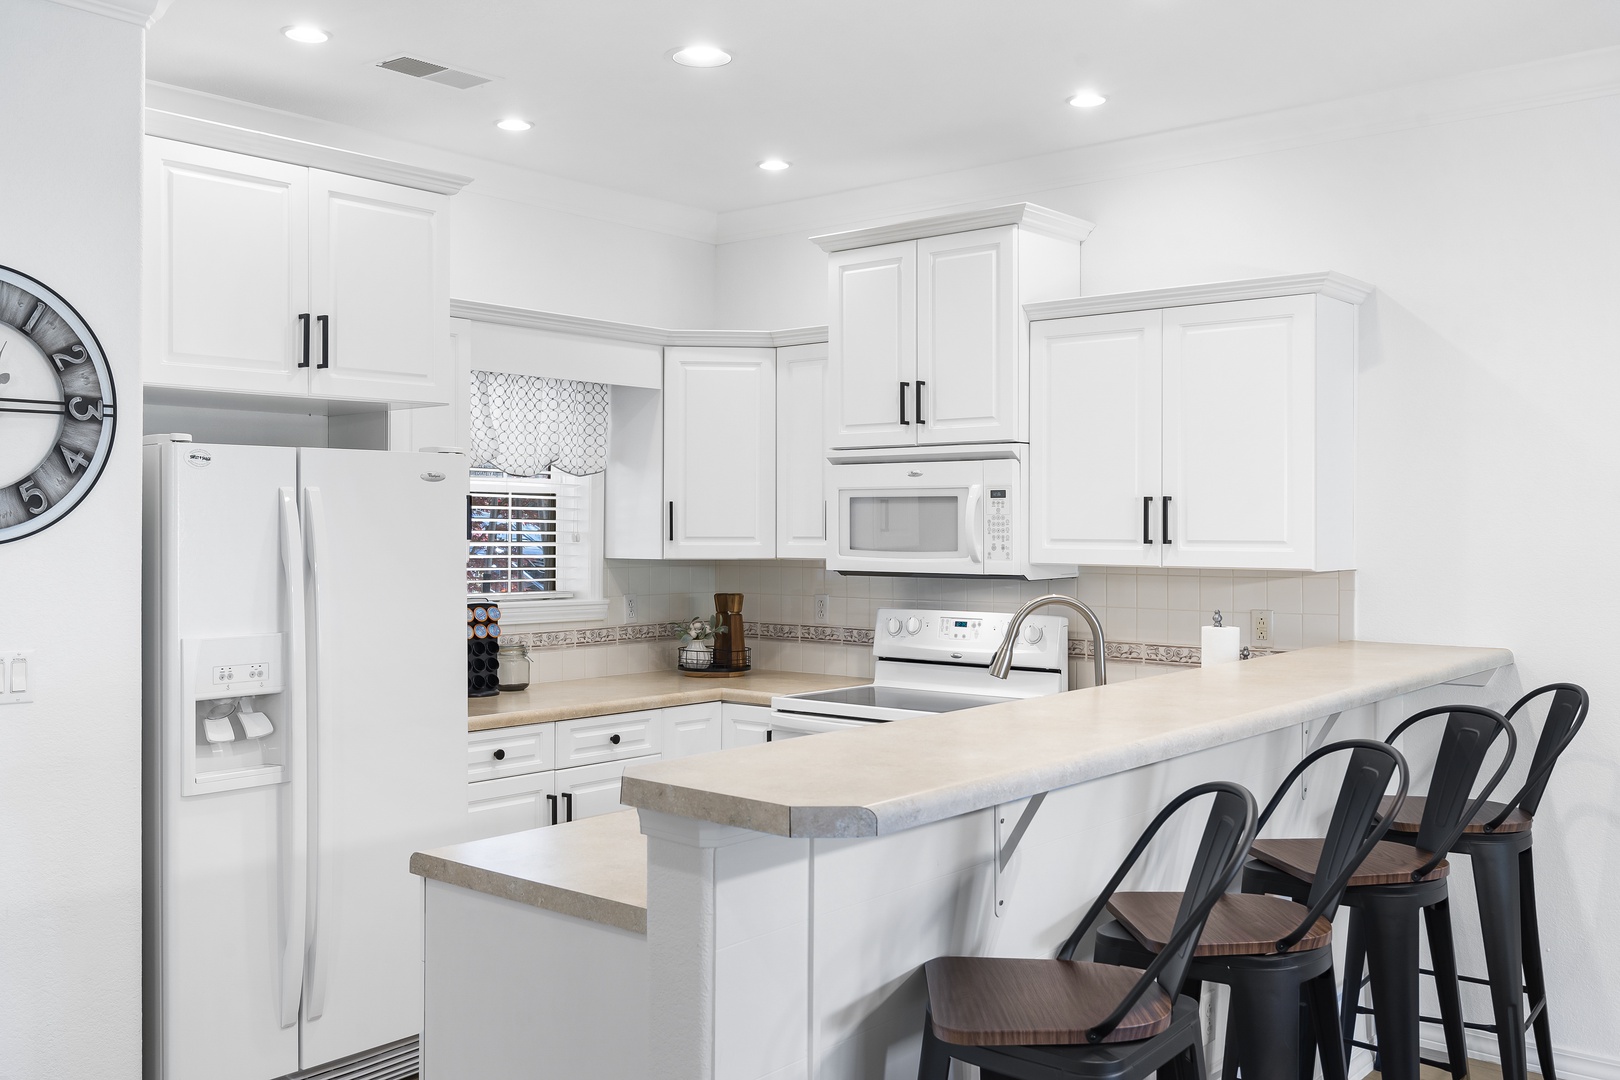 The fully equipped kitchen offers ample counter and storage spaceJ07422